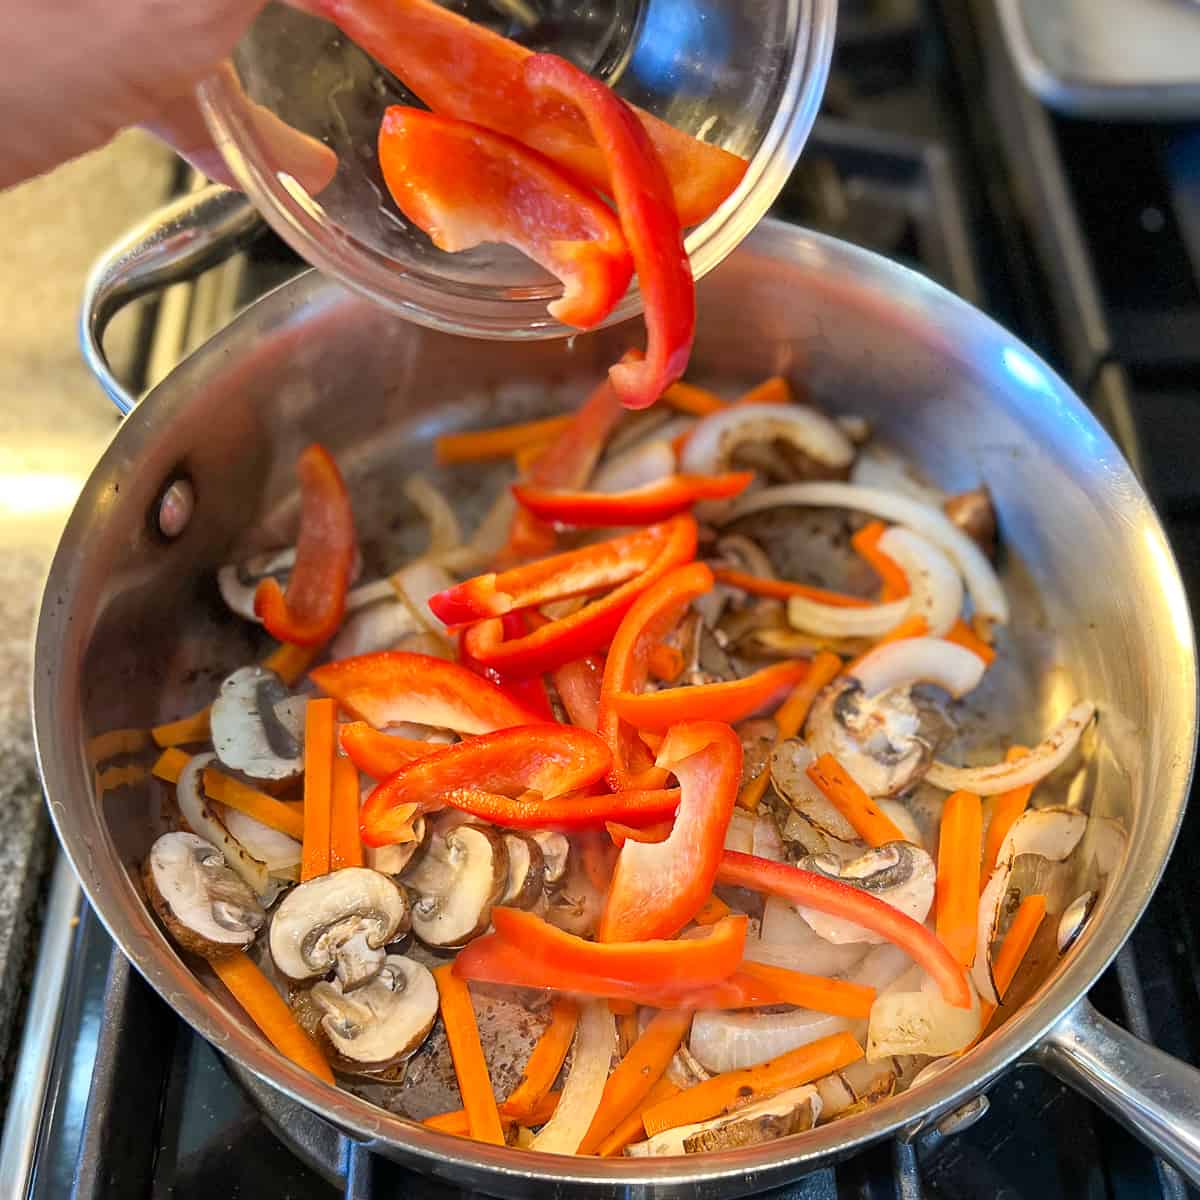 top view of sliced red bell pepper being added to a pan with sautéed veggies